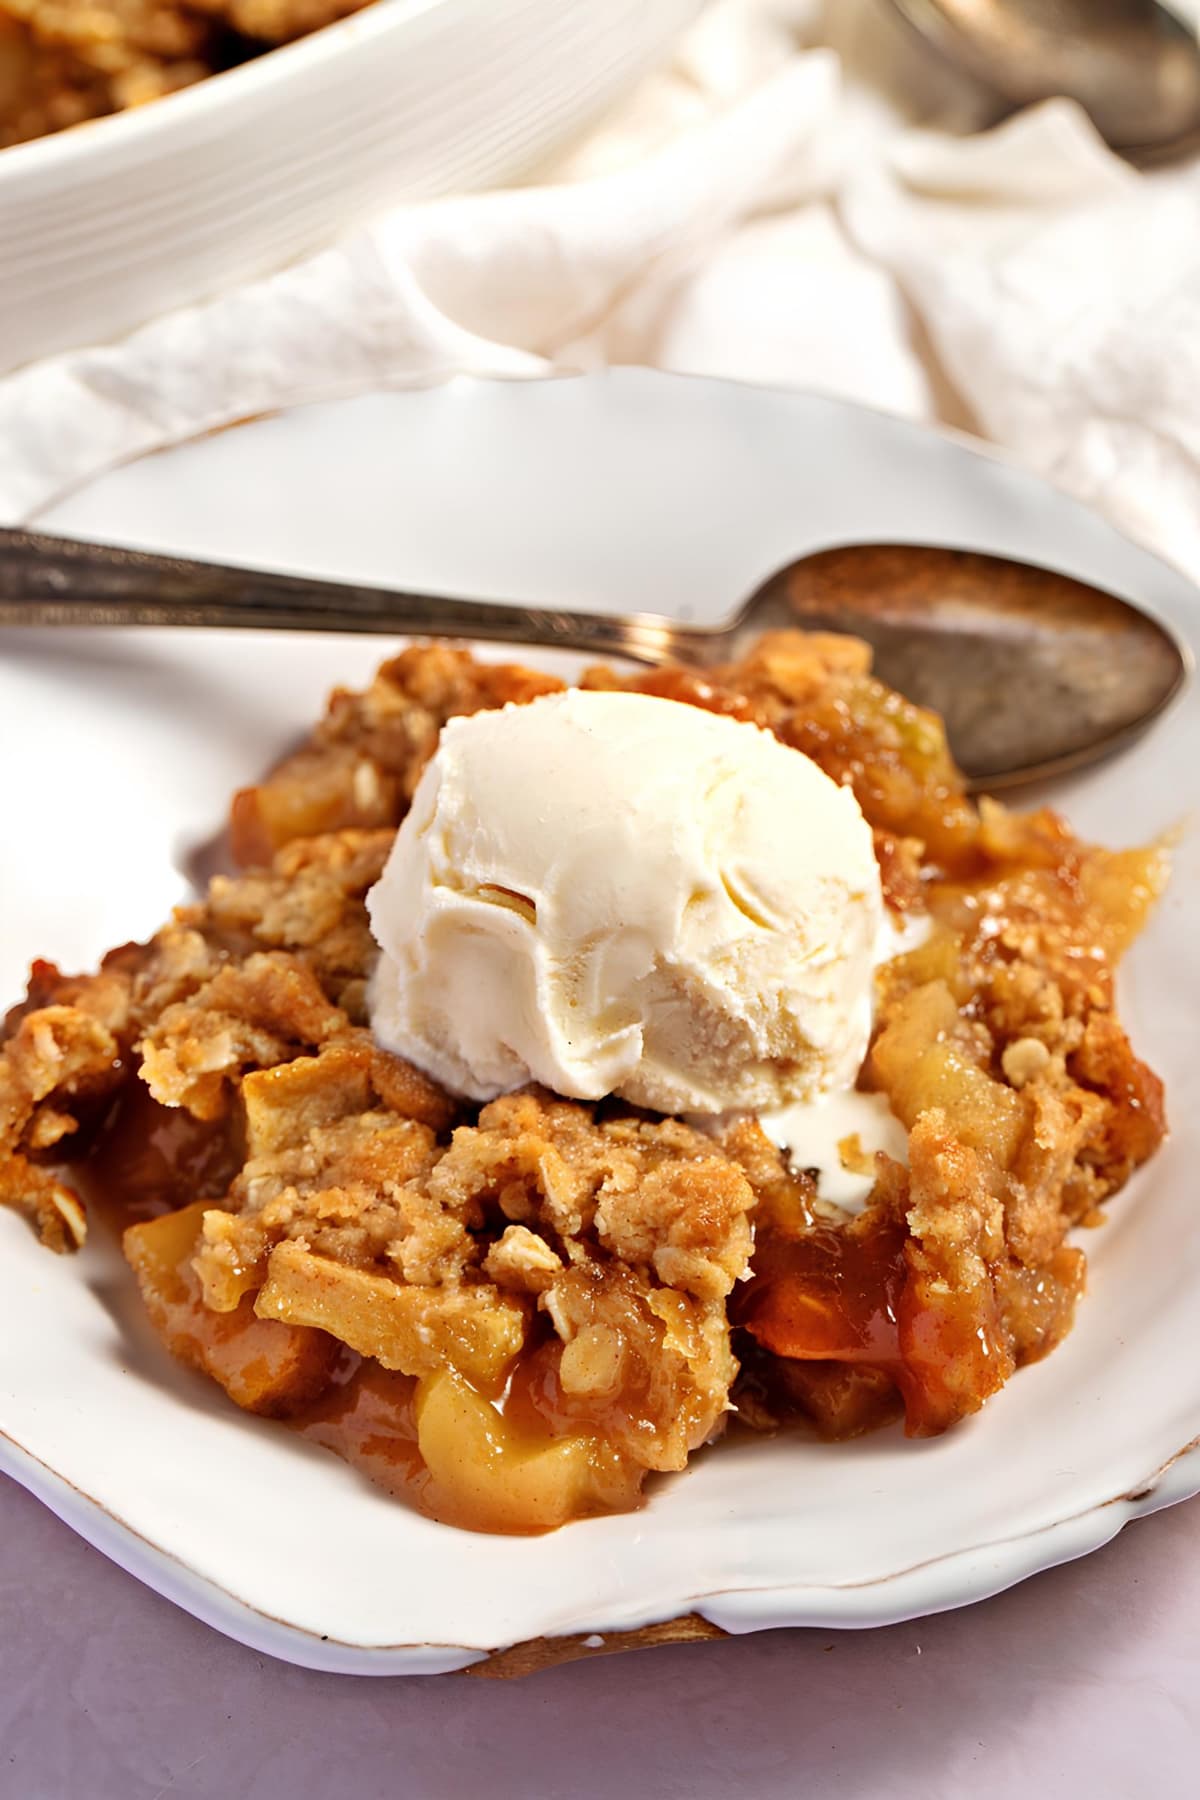 Apple Crumble with a scoop of vanilla ice cream on top